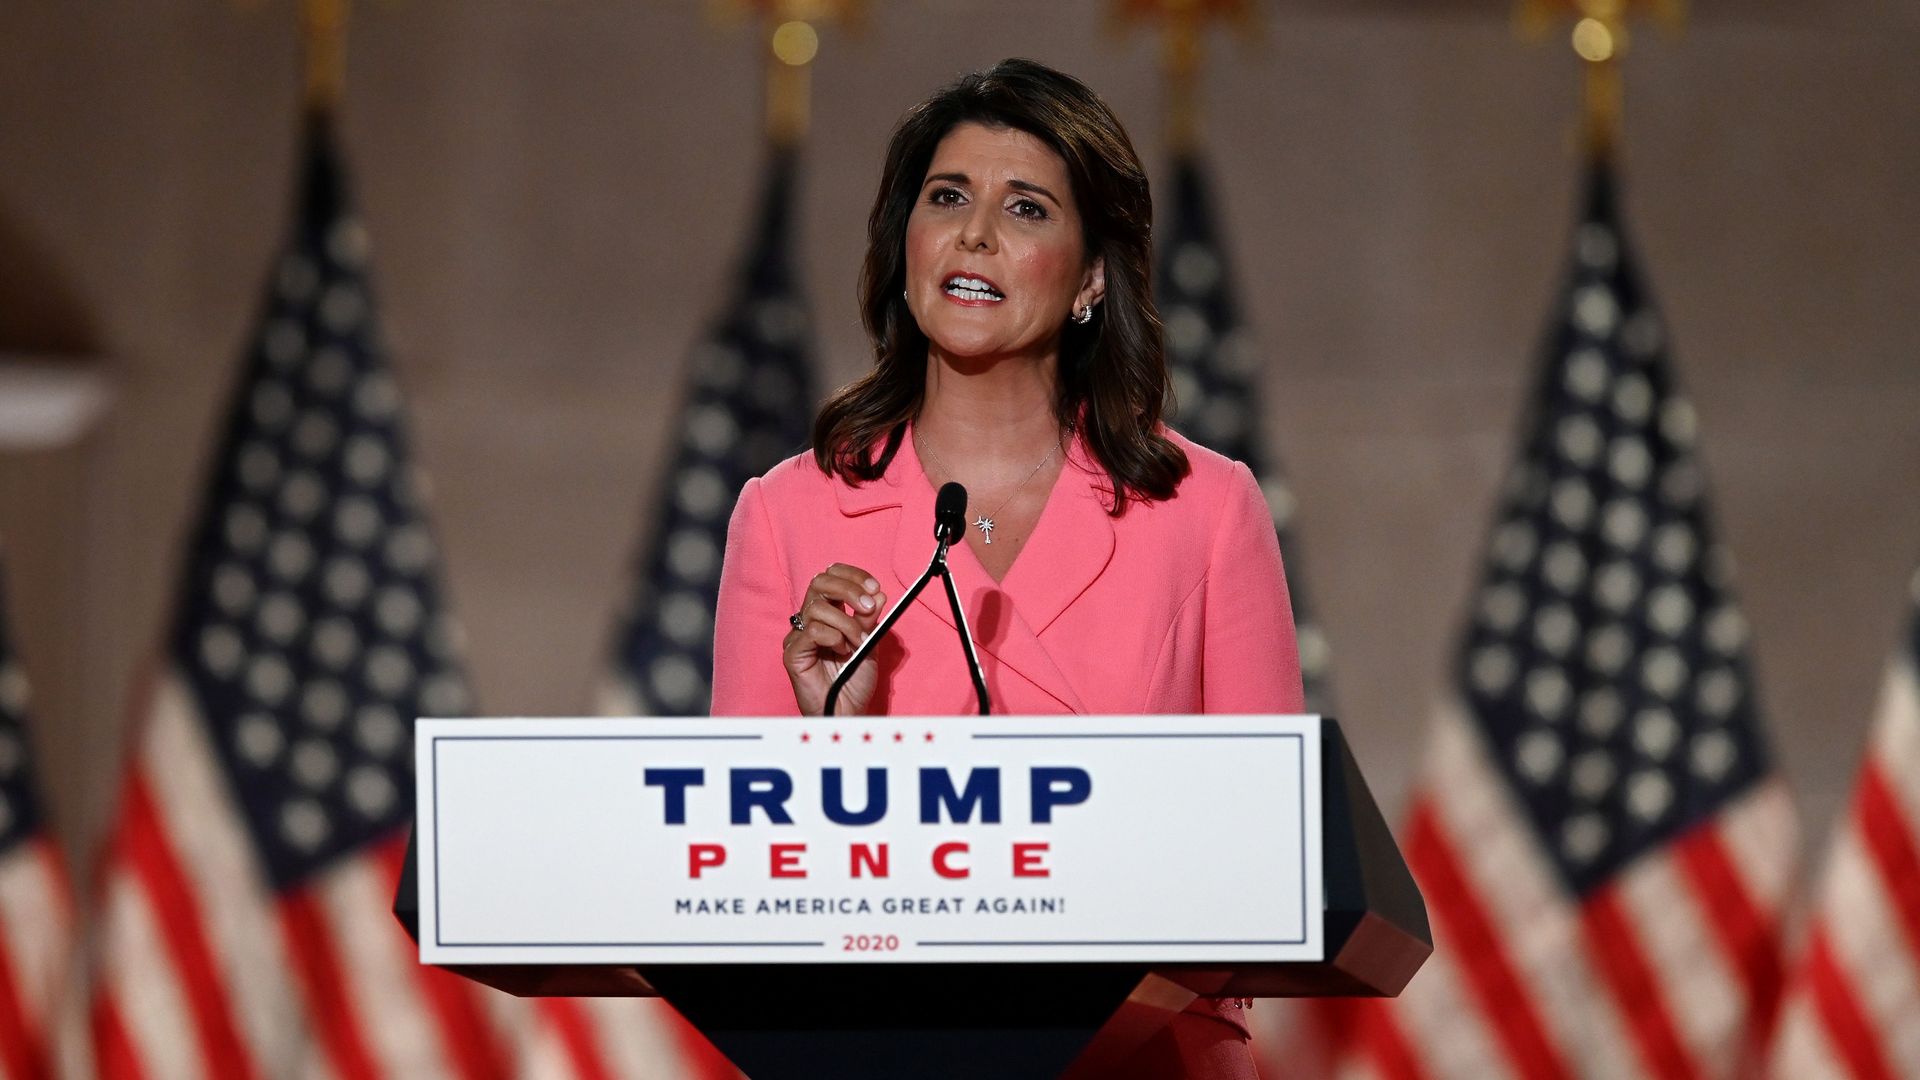 Nikki Haley is seen speaking during the 2020 Republican National Convention.